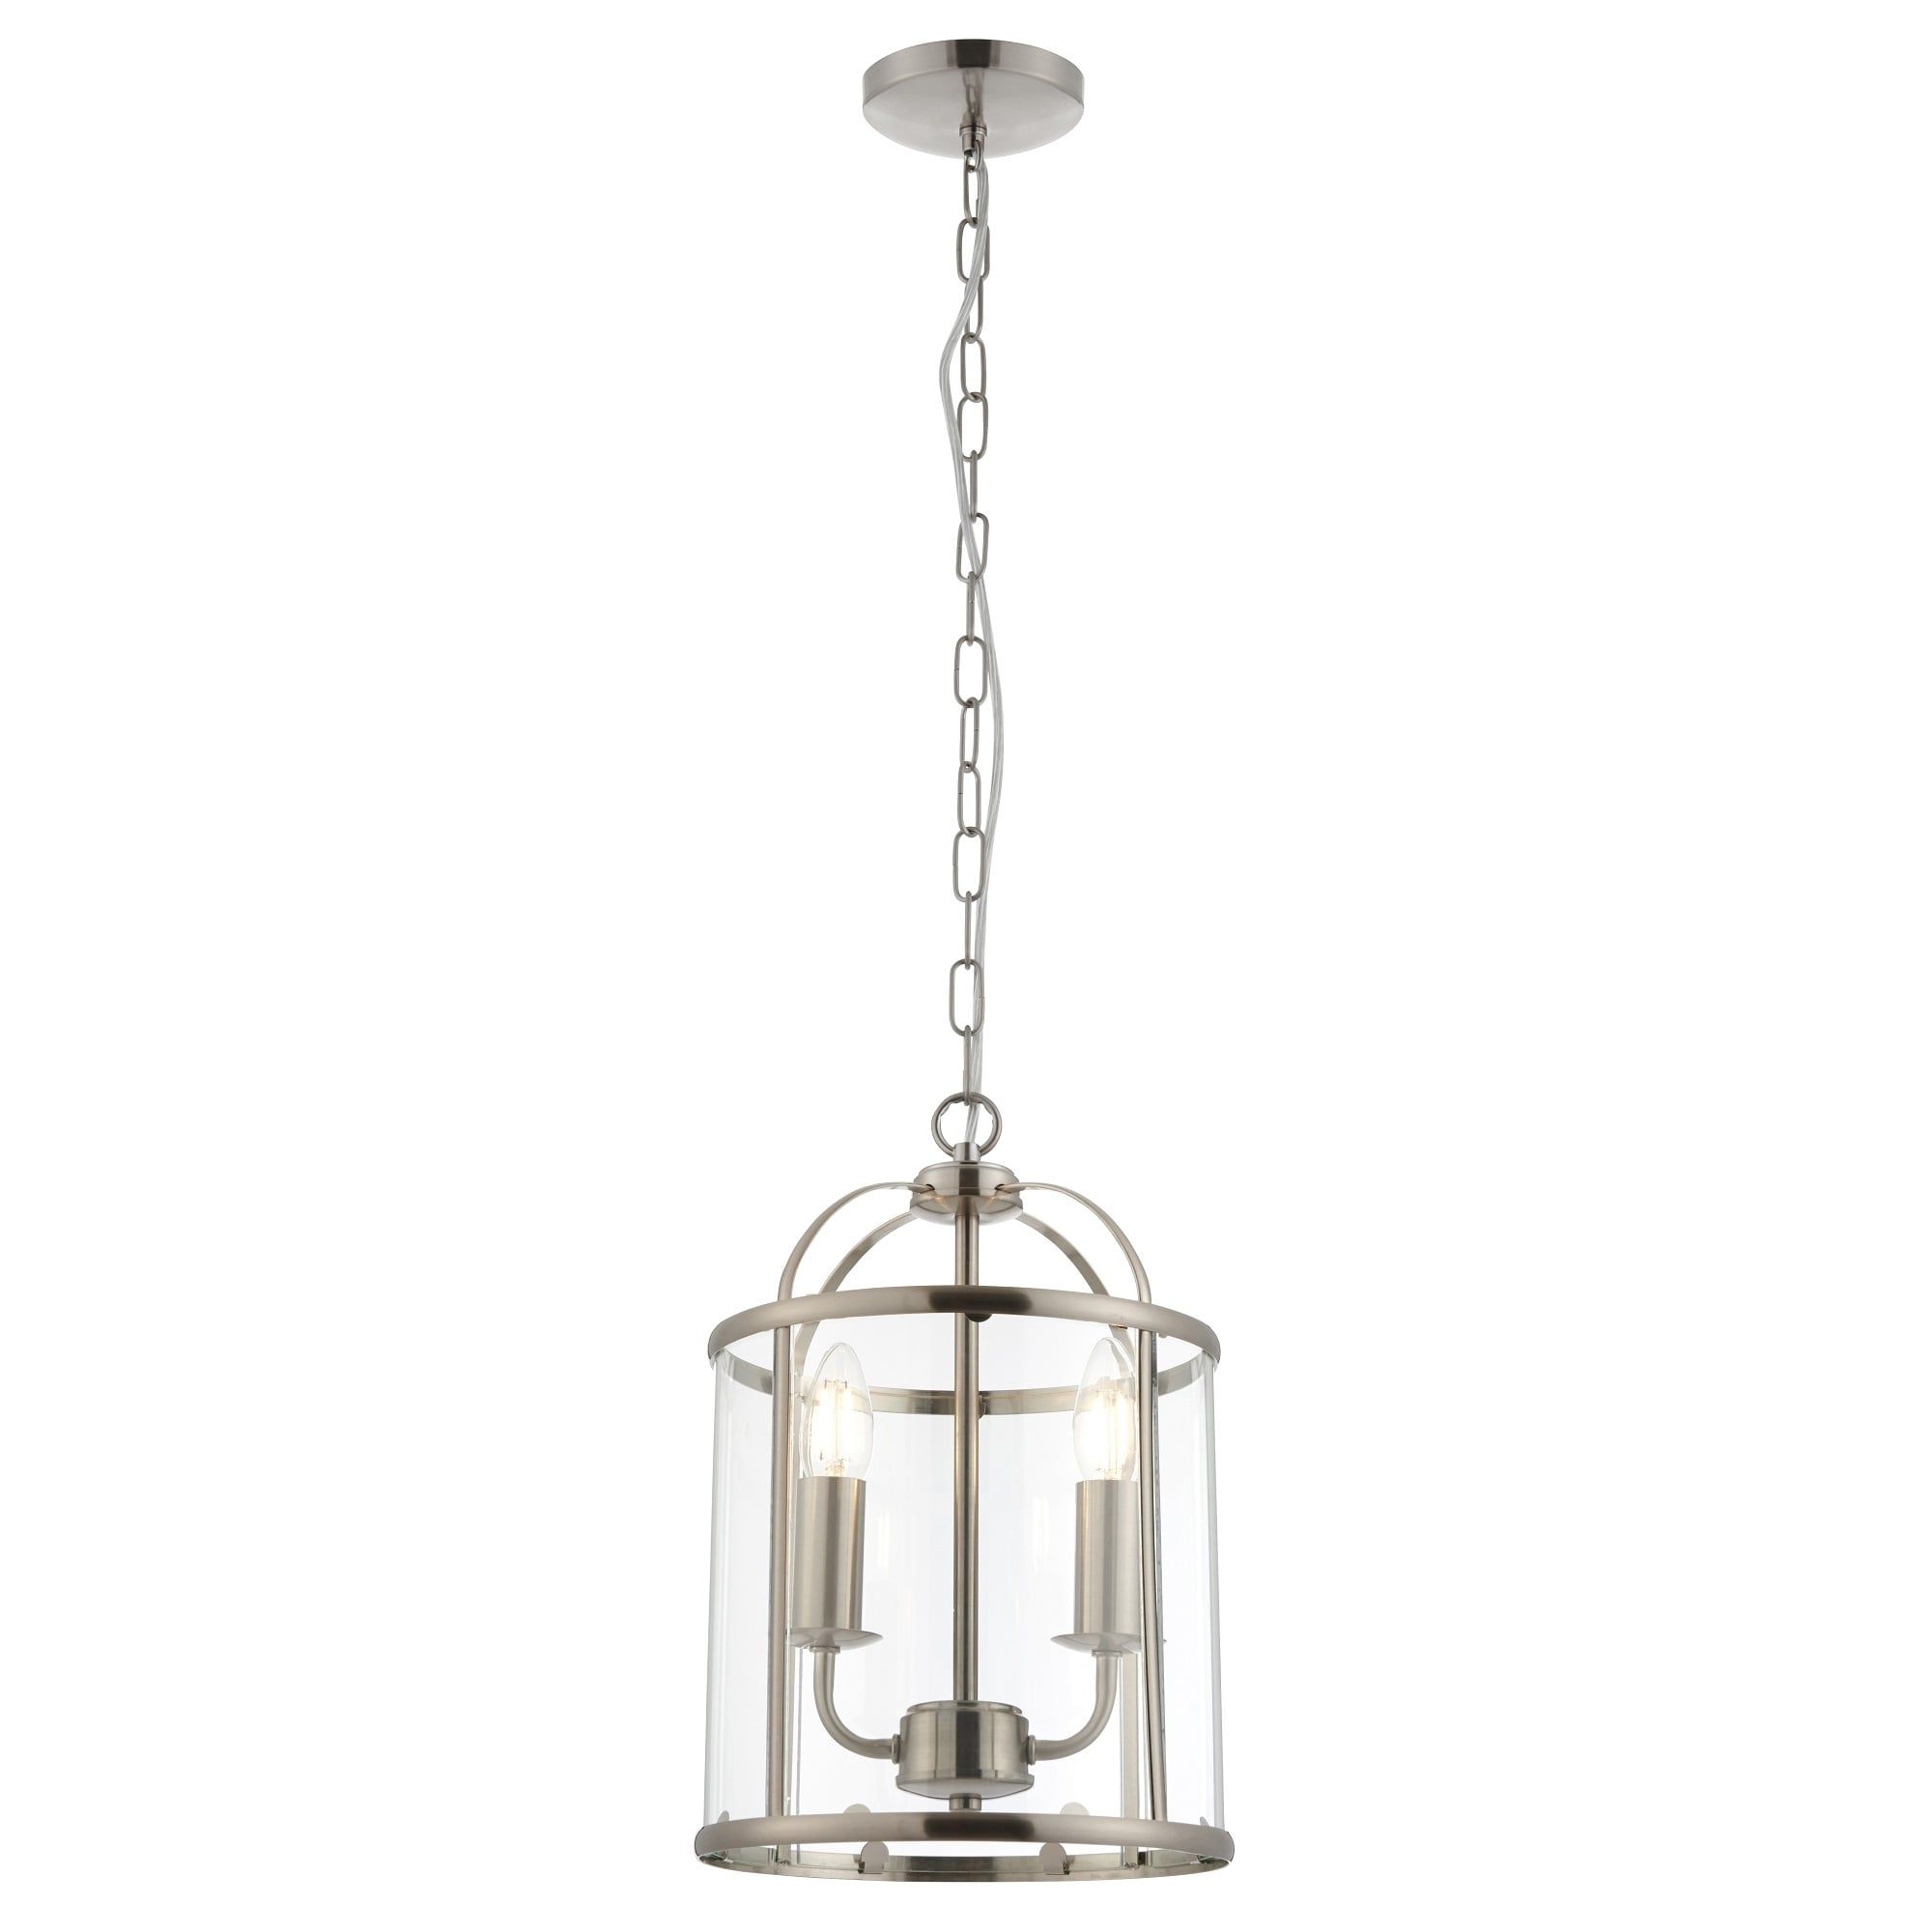 Newest Thlc Traditional 2 Light Brushed Silver Nickel Round Hanging Hall Ceiling  Lantern – Lighting From The Home Lighting Centre Uk Pertaining To Two Light Lantern Chandeliers (View 14 of 15)